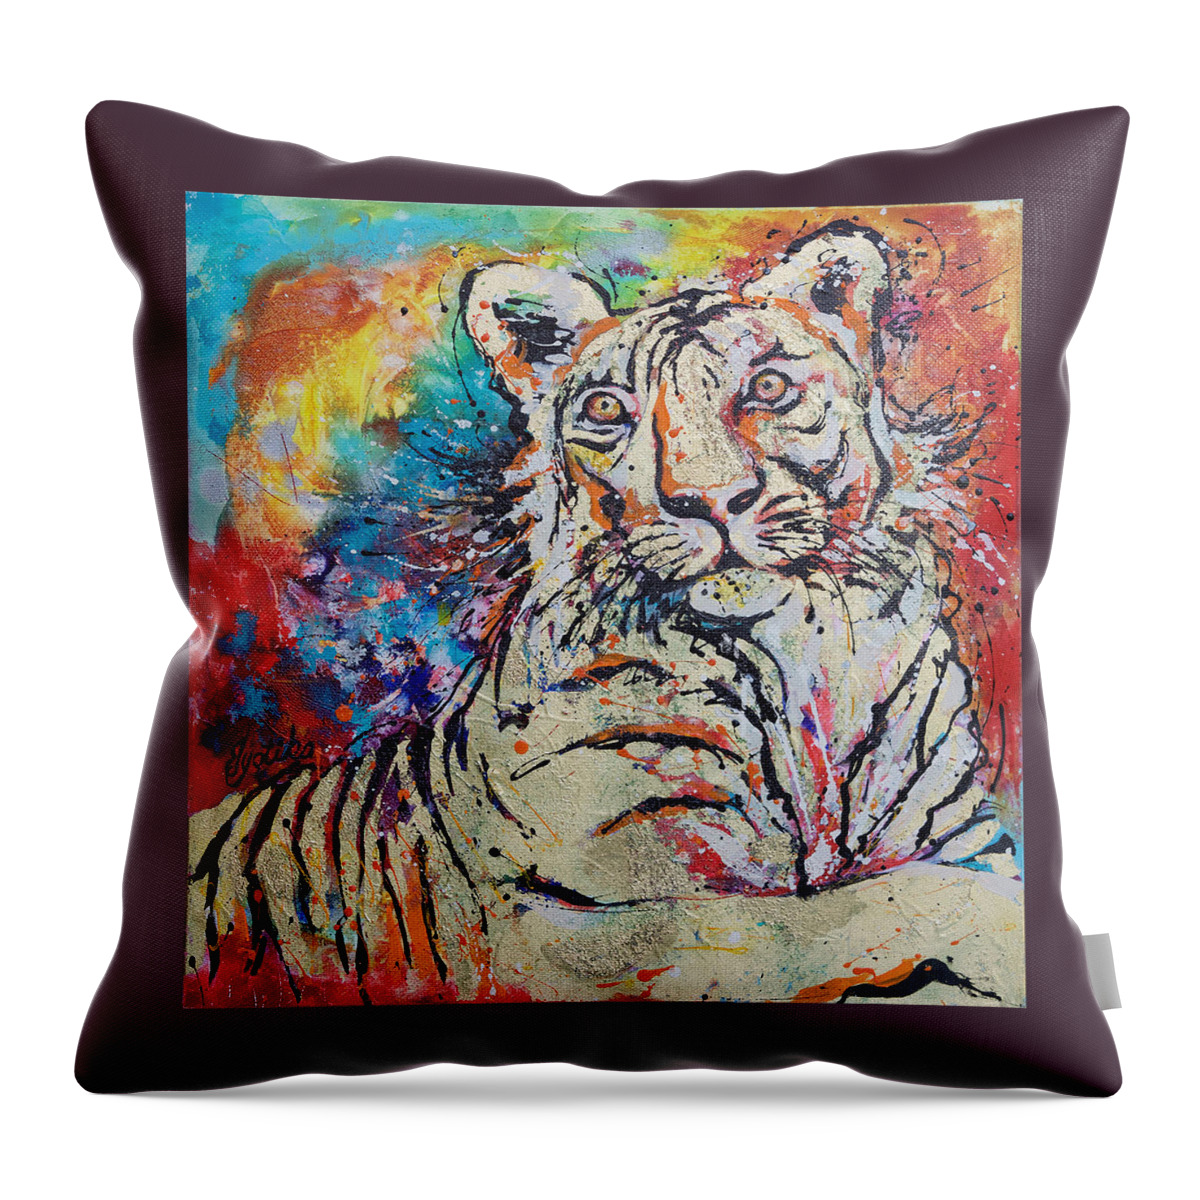 Tiger Throw Pillow featuring the painting Watchful Tigeress by Jyotika Shroff